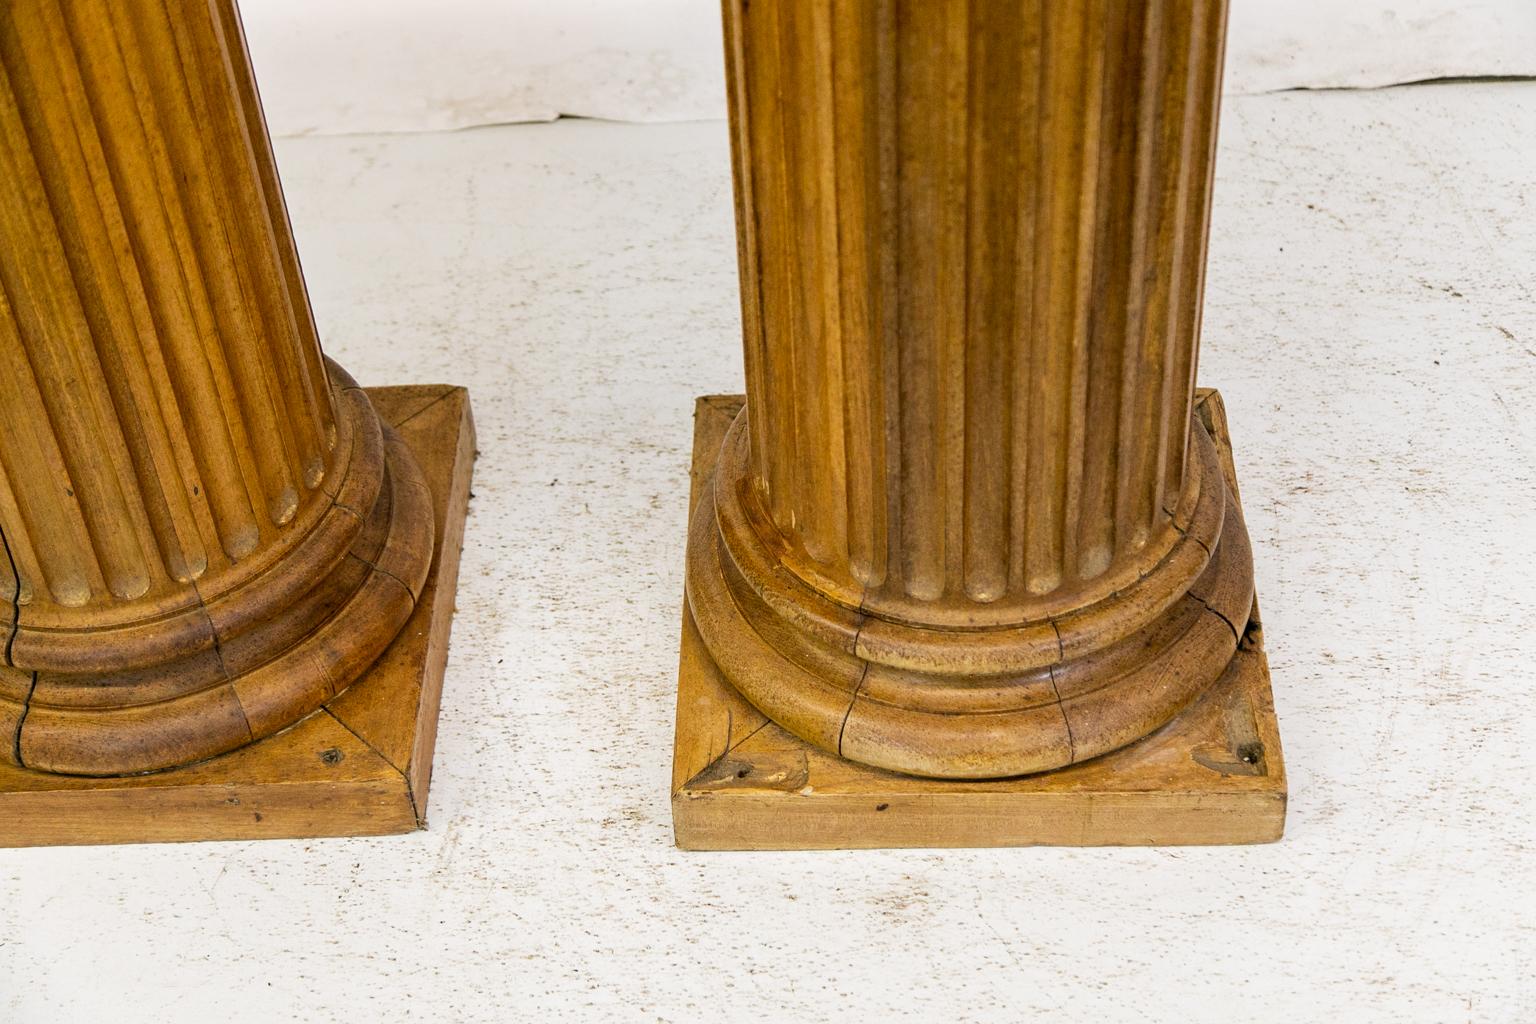 Pair of English pine fluted columns, with capitals that are elaborately carved in a modified Corinthian style. The columns are fluted from top to bottom and terminate in turned bases resting on square plinths. The diameter is 11”, they are 15.5”